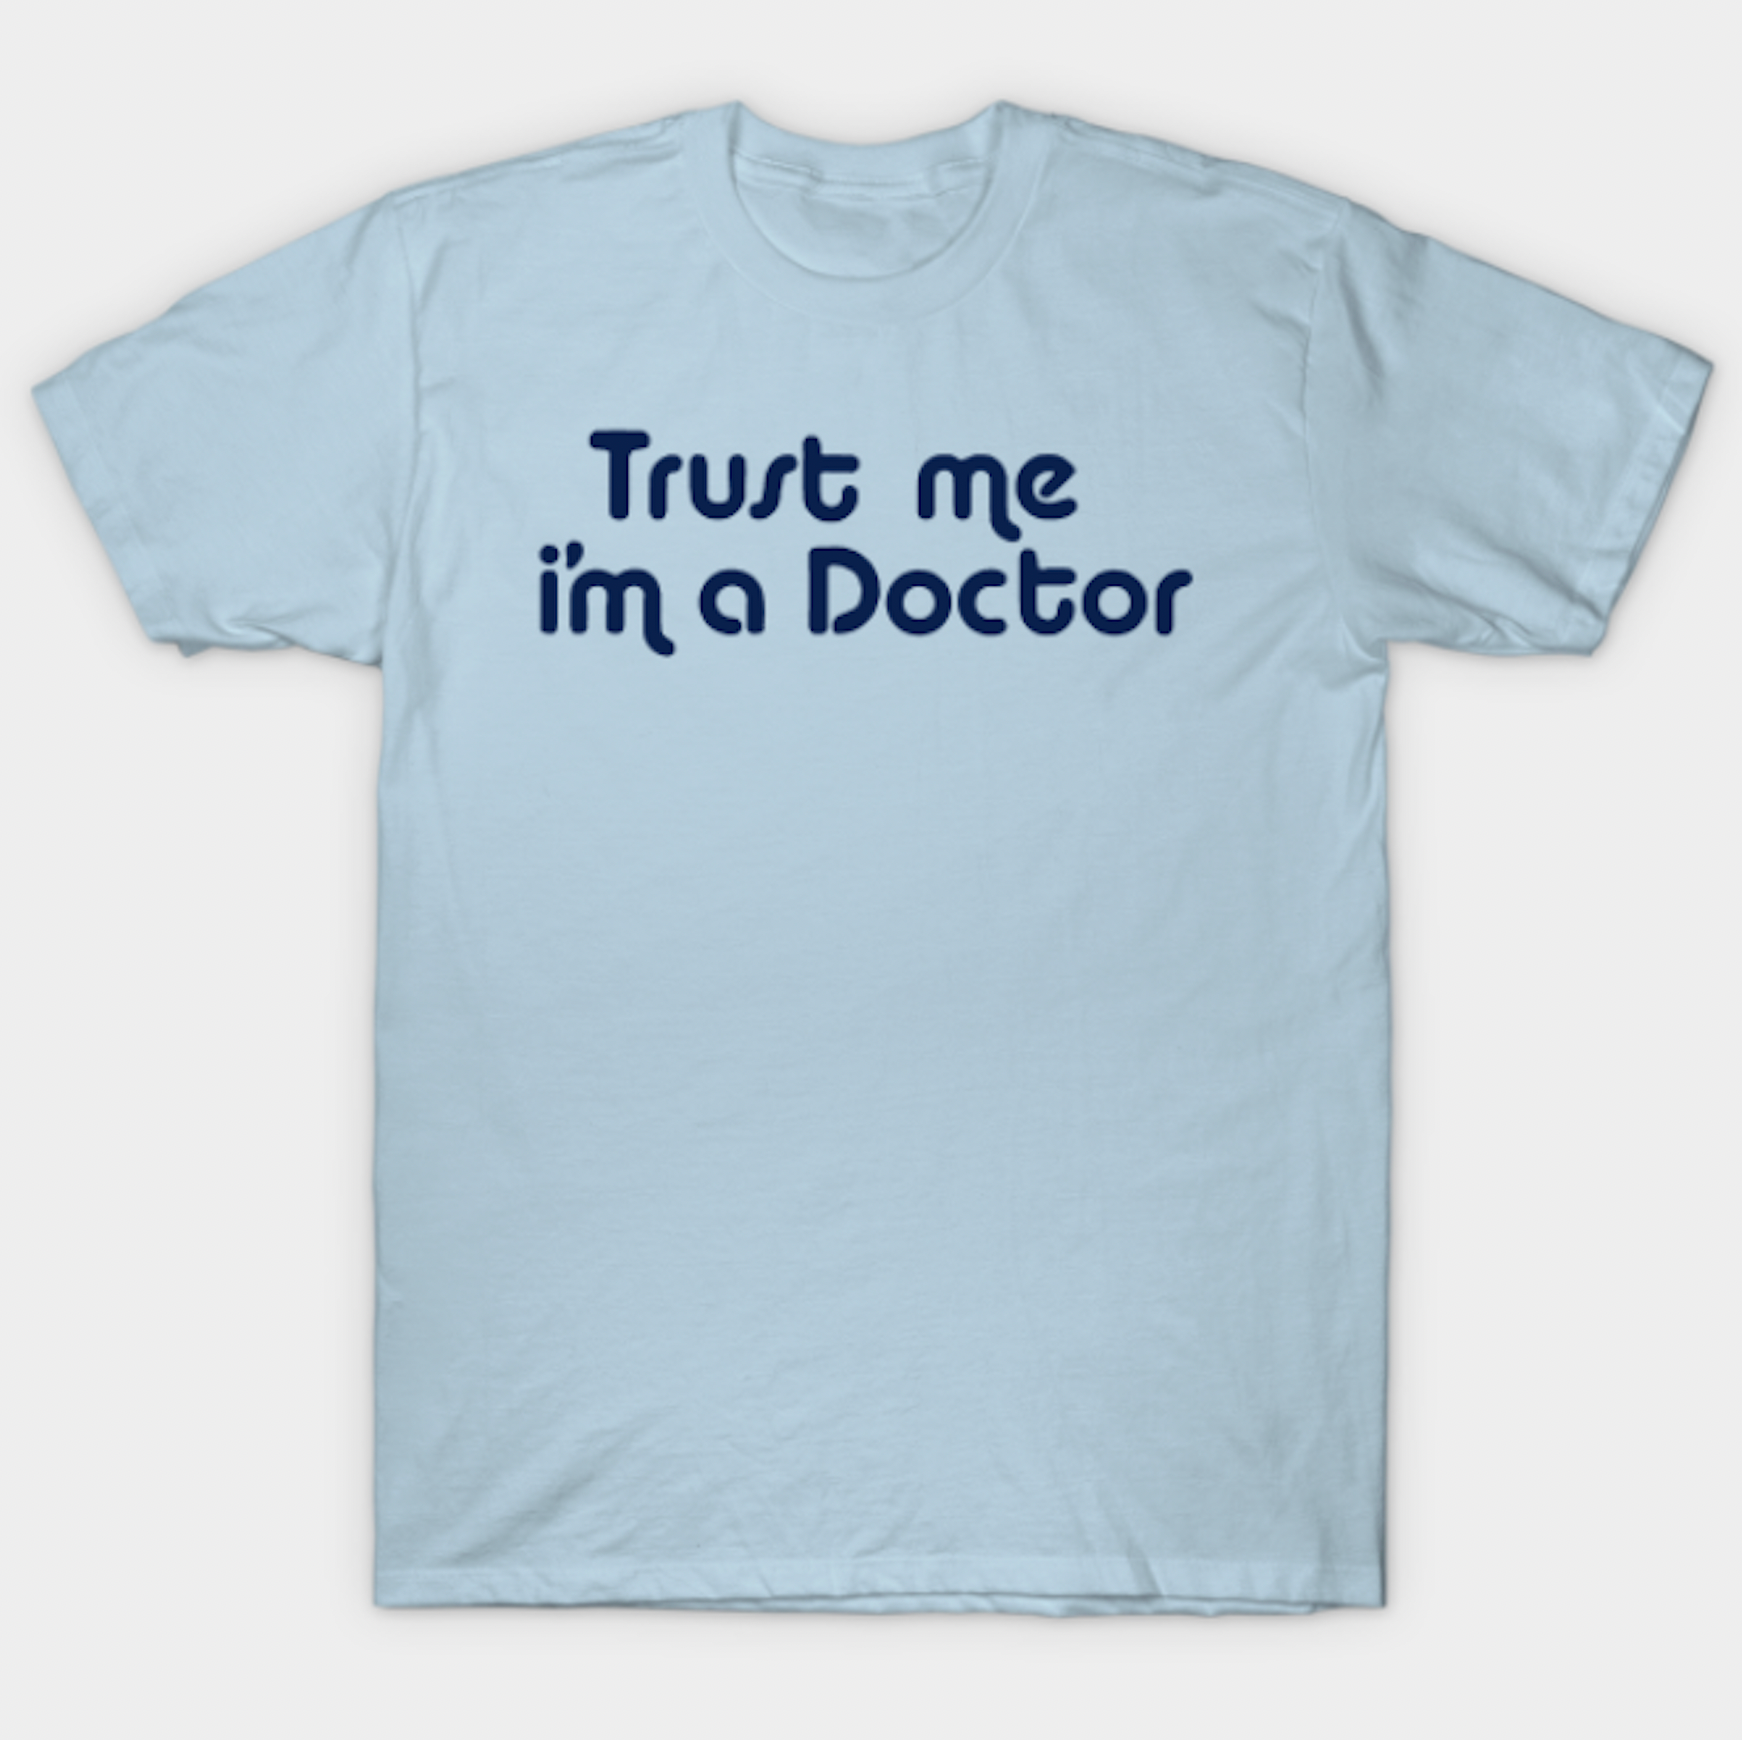 T-shirt that says "Trust me I am a Doctor"